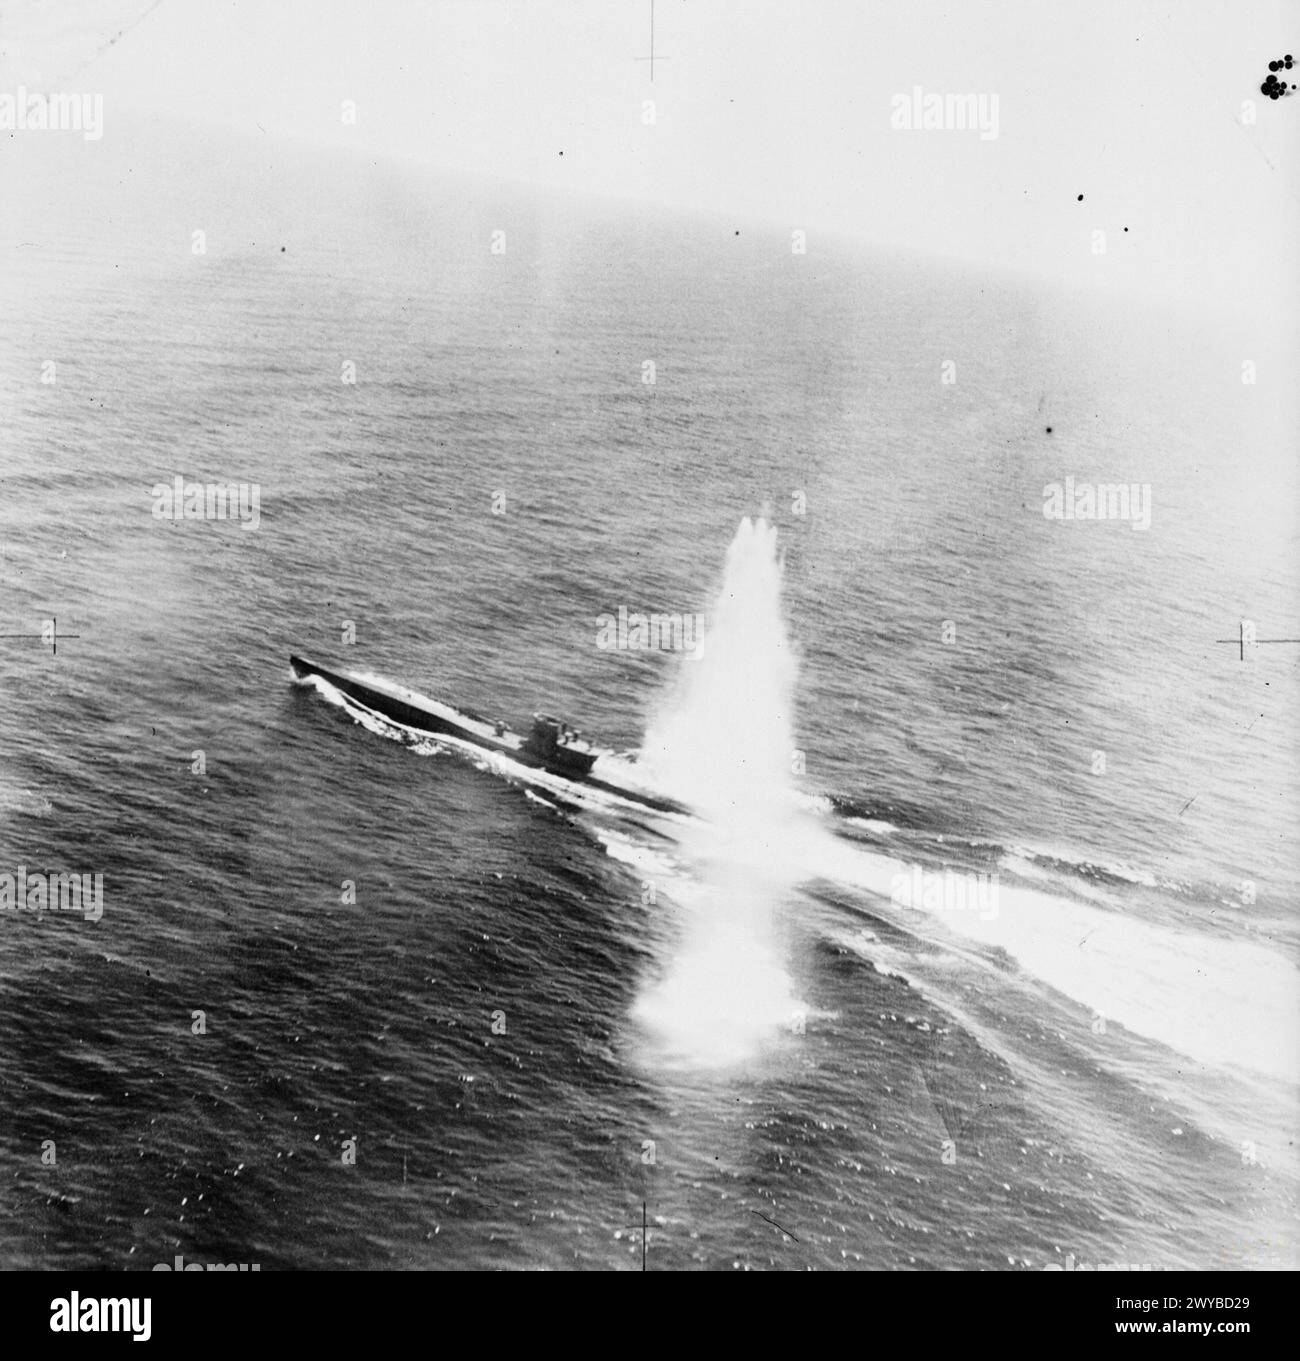 ROYAL AIR FORCE OPERATIONS IN MALTA, GIBRALTAR AND THE MEDITERRANEAN, 1940-1945. - German submarine Type VIIC, U-755, suffers a direct hit from a rocket projectile, while under attack in the Mediterranean Sea north-west of Mallorca from Lockheed Hudson Mark V, AM725 'M', of No. 608 Squadron RAF based at Blida, Algeria. U-755, already damaged as a result of another air attack two days previously, sank in nine minutes with the loss of 40 lives, the first occasion on which a submarine was destroyed by rockets. , Royal Air Force, Maintenance Unit, 68, German Navy (Third Reich), U-755, submarine Stock Photo